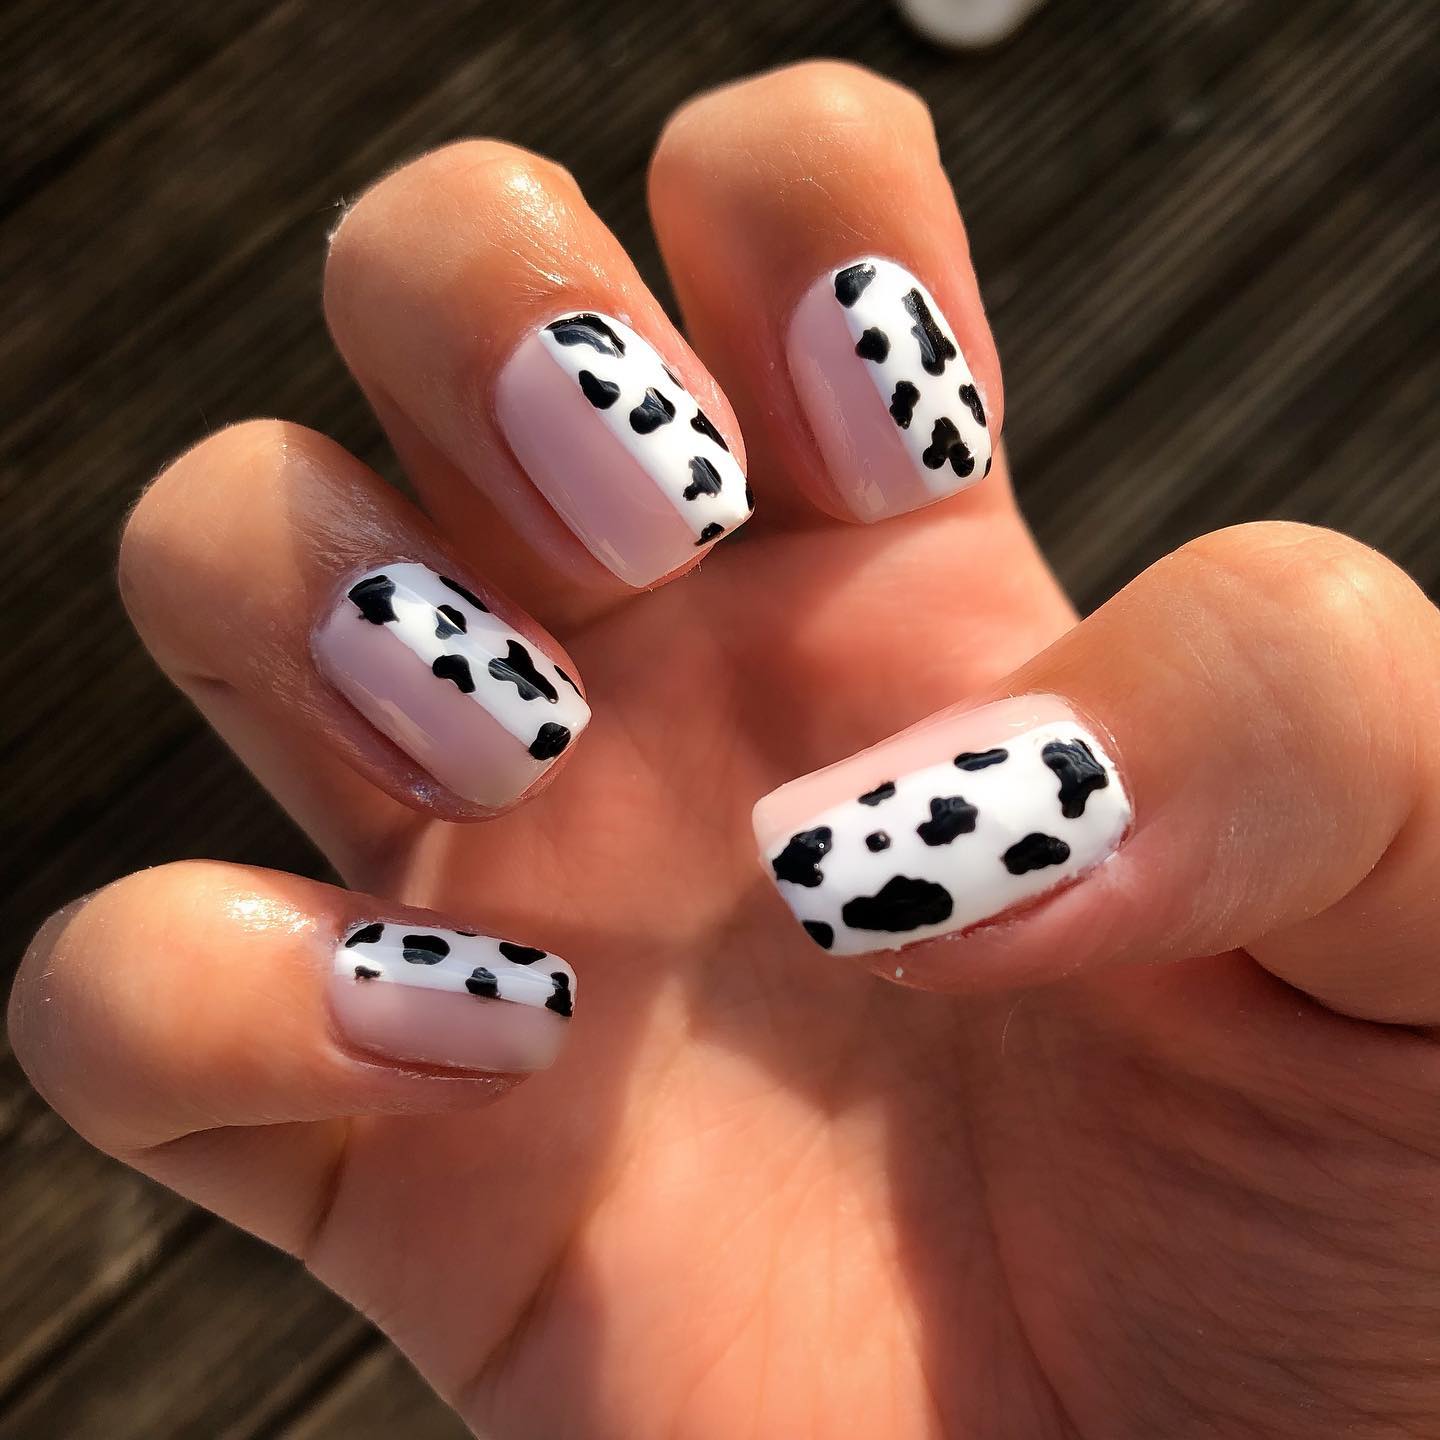 If you are into nude nail polishes but wanna try something new, you should go for half nude half cow print nails like the ones above. First, you need to apply nude nail polish to half of your nail and white one to the other. Then, draw random dots to create the nail art.